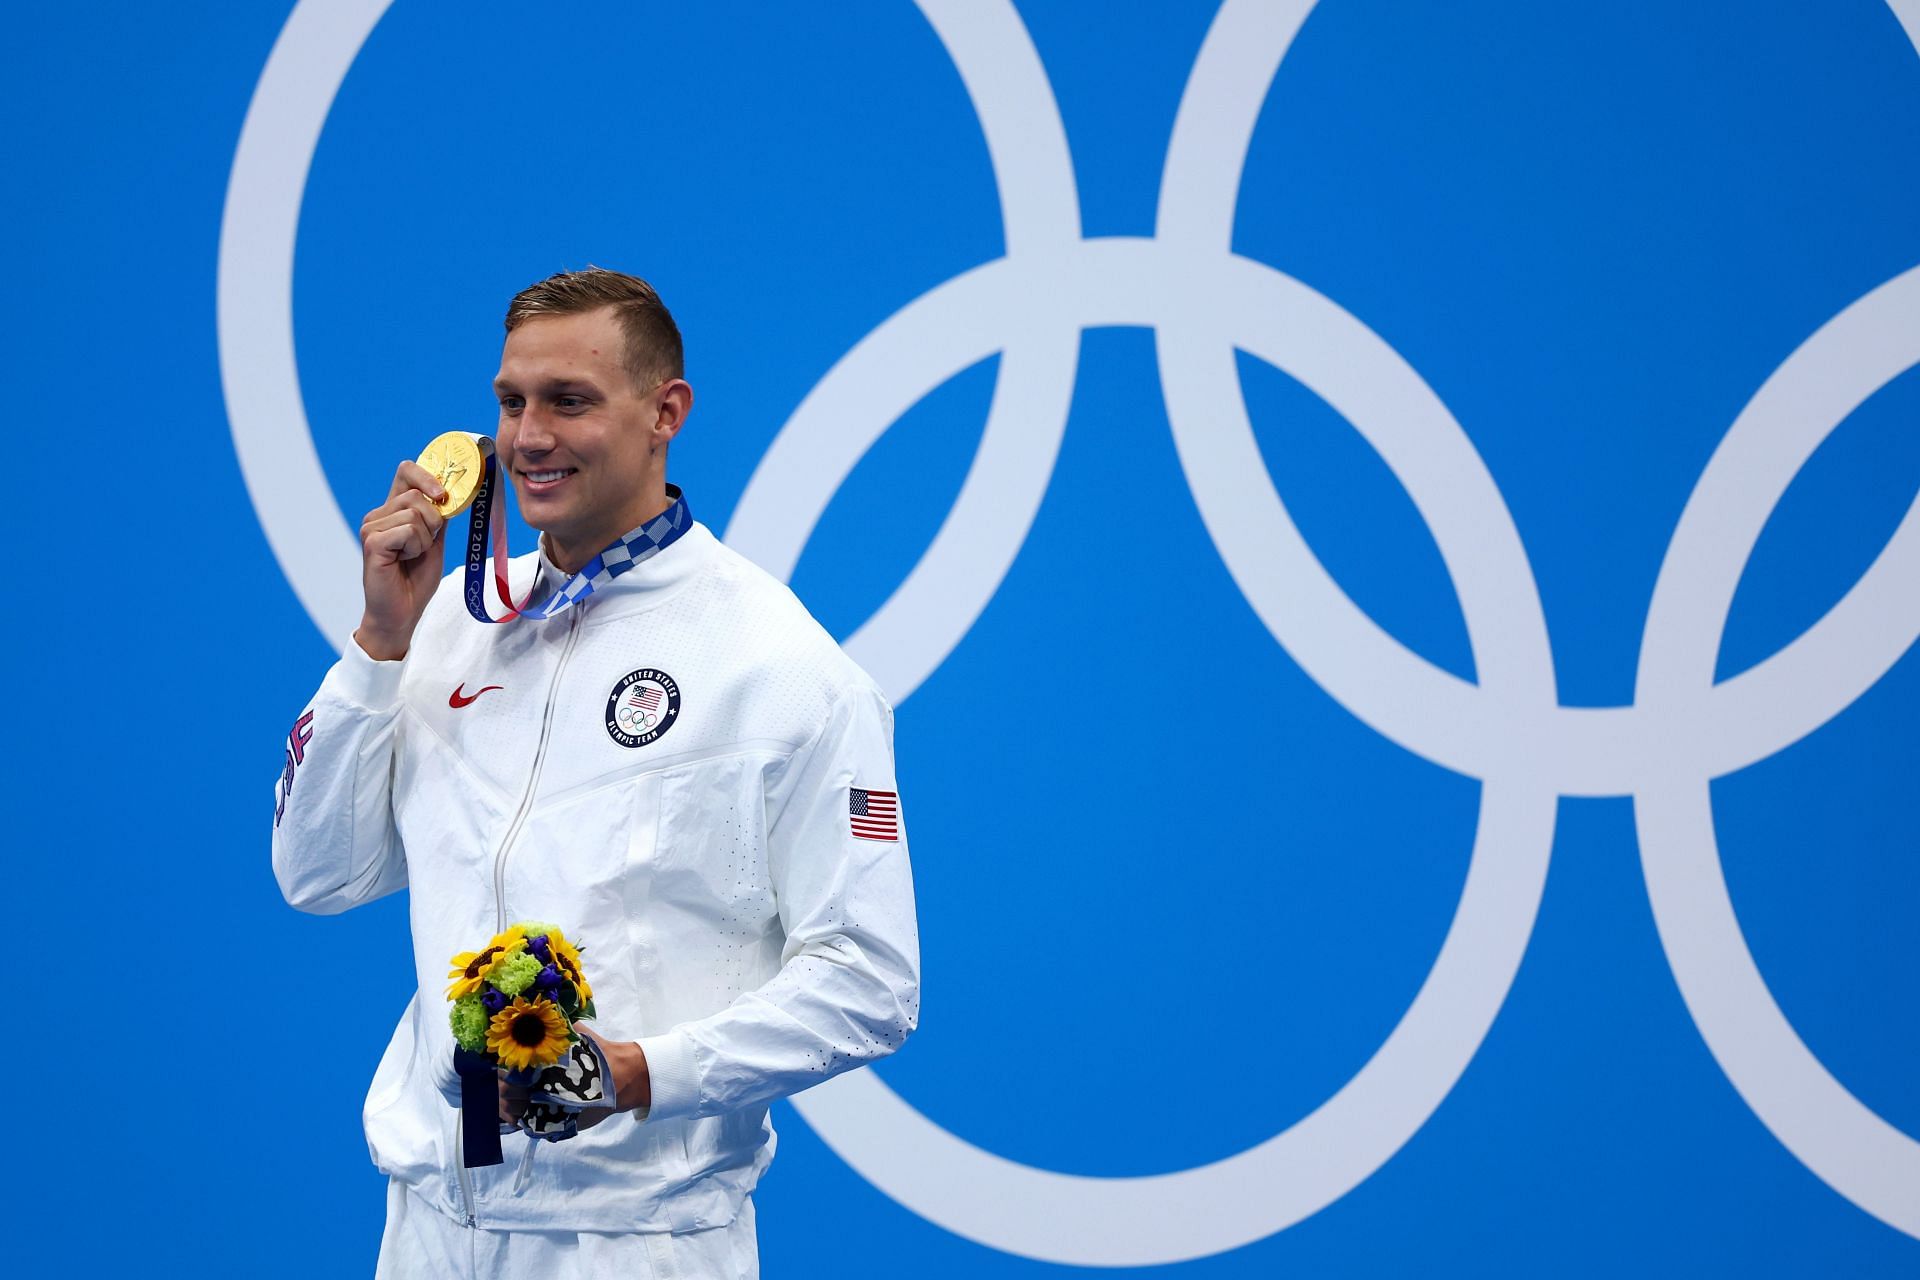 Dressel wins gold at the Tokyo Olympics, 2021 (Photo by Maddie Meyer/Getty Images)